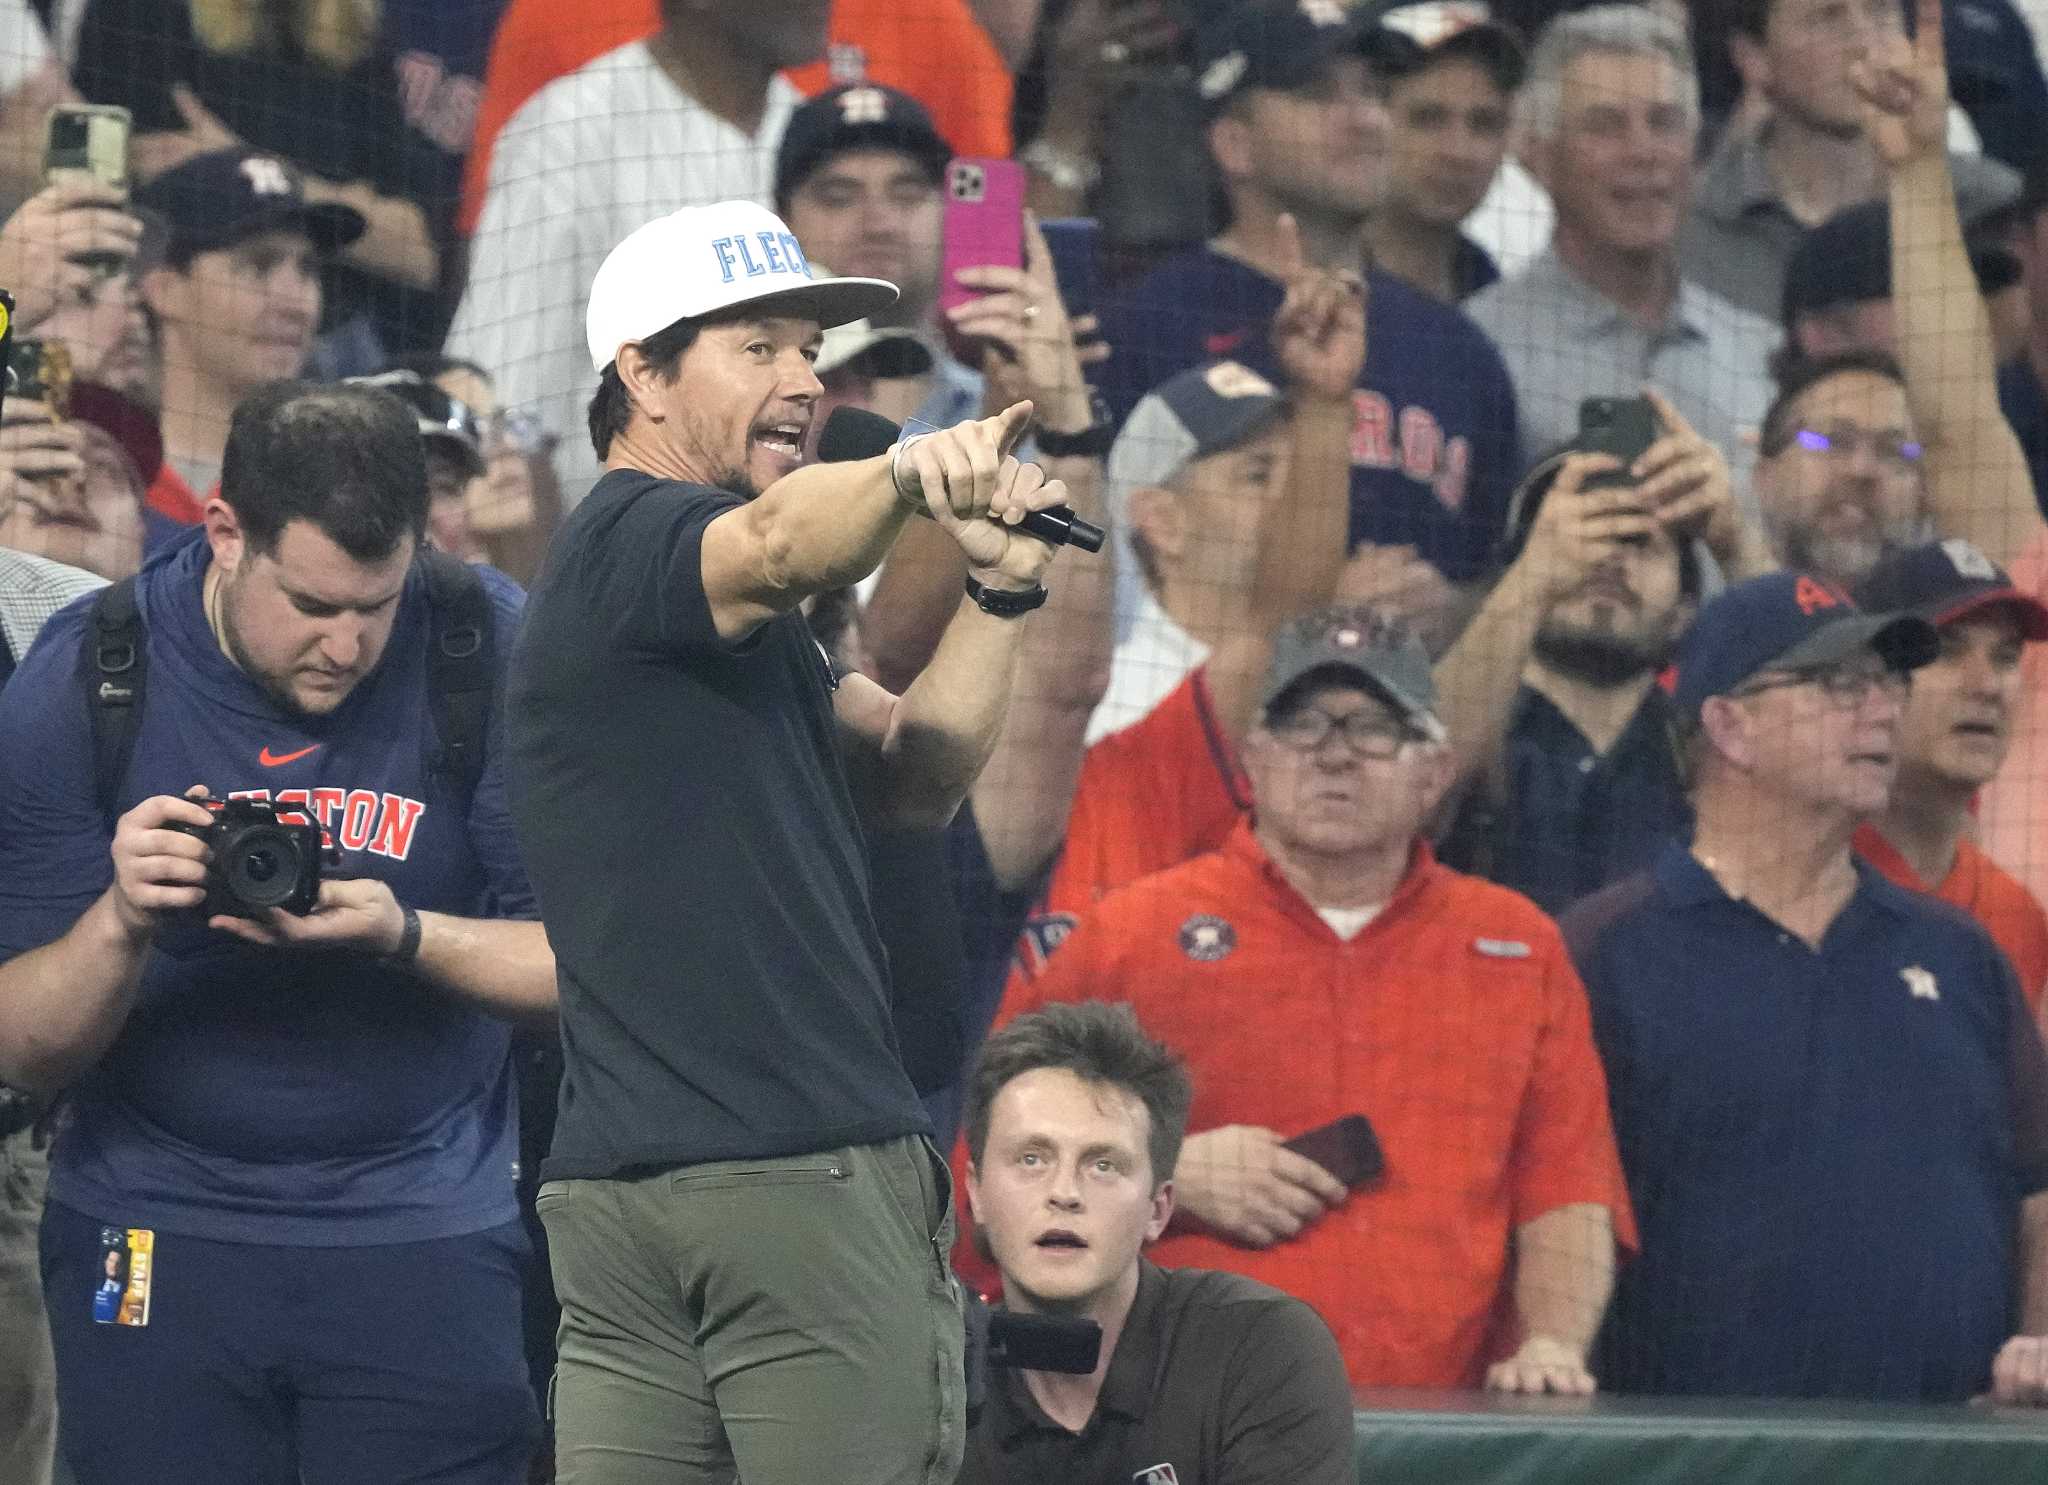 Mark Wahlberg explains why he's a fan of Alex Bregman, Astros